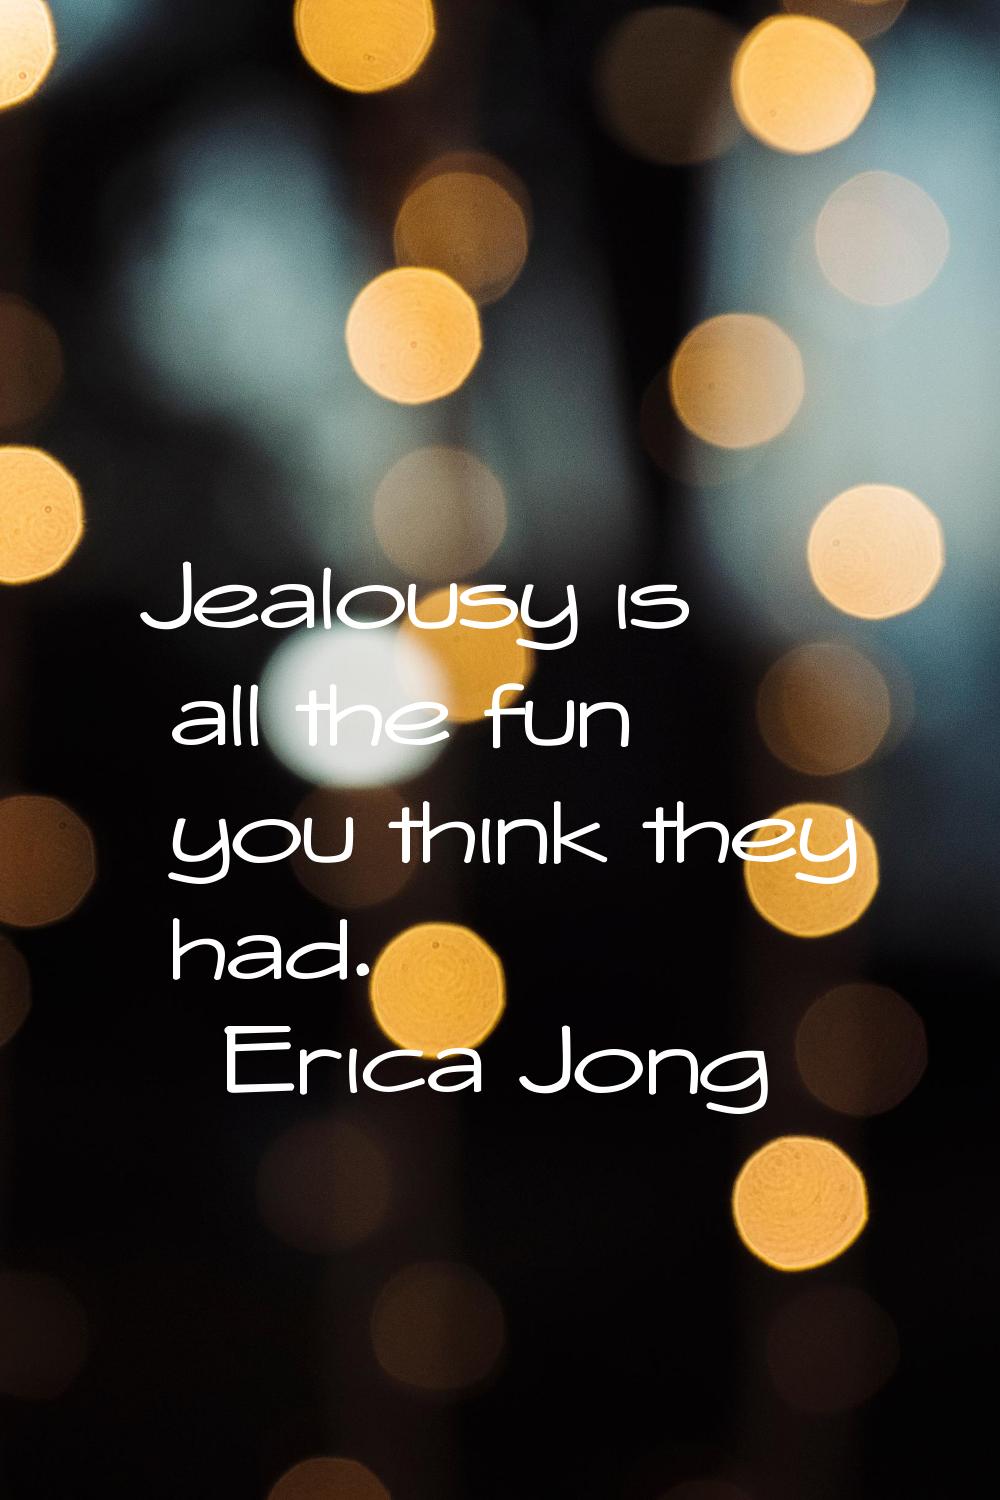 Jealousy is all the fun you think they had.